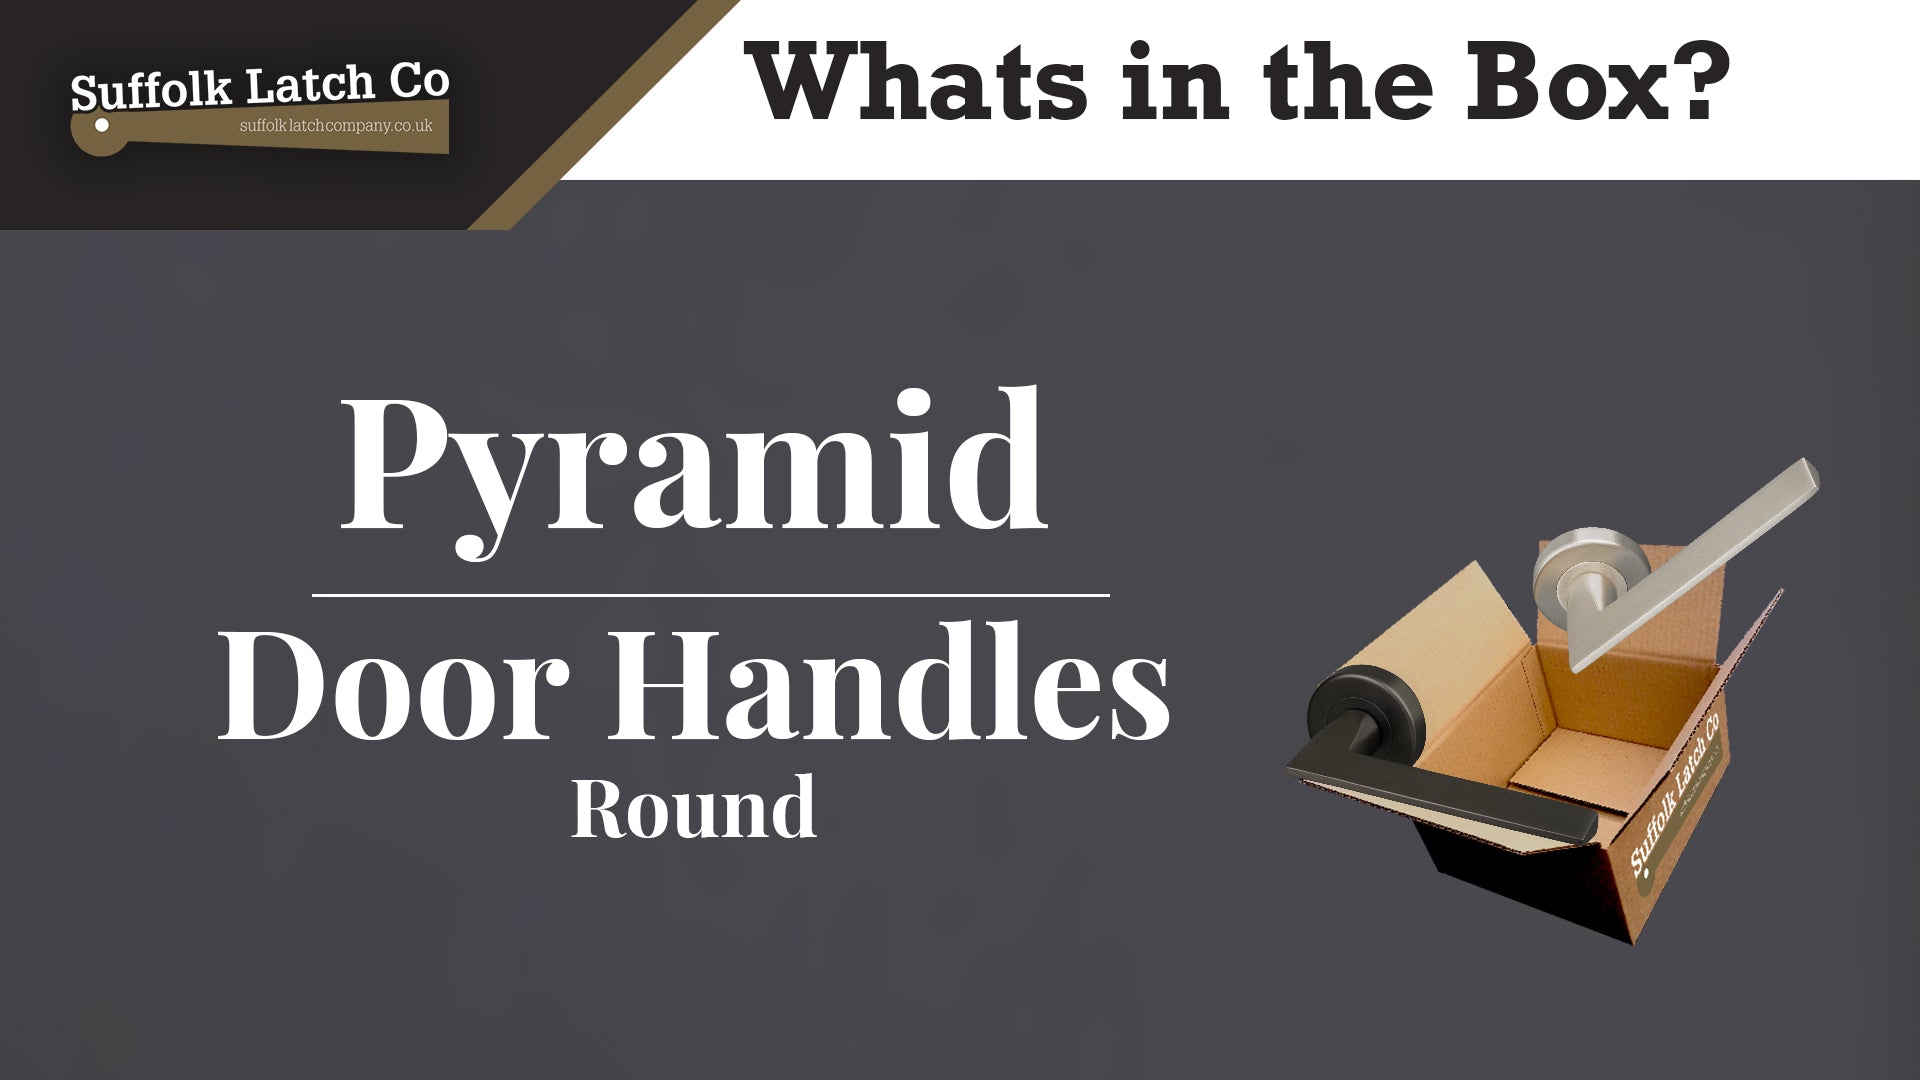 What's in the Box: Pyramid Round Rose Door Handles